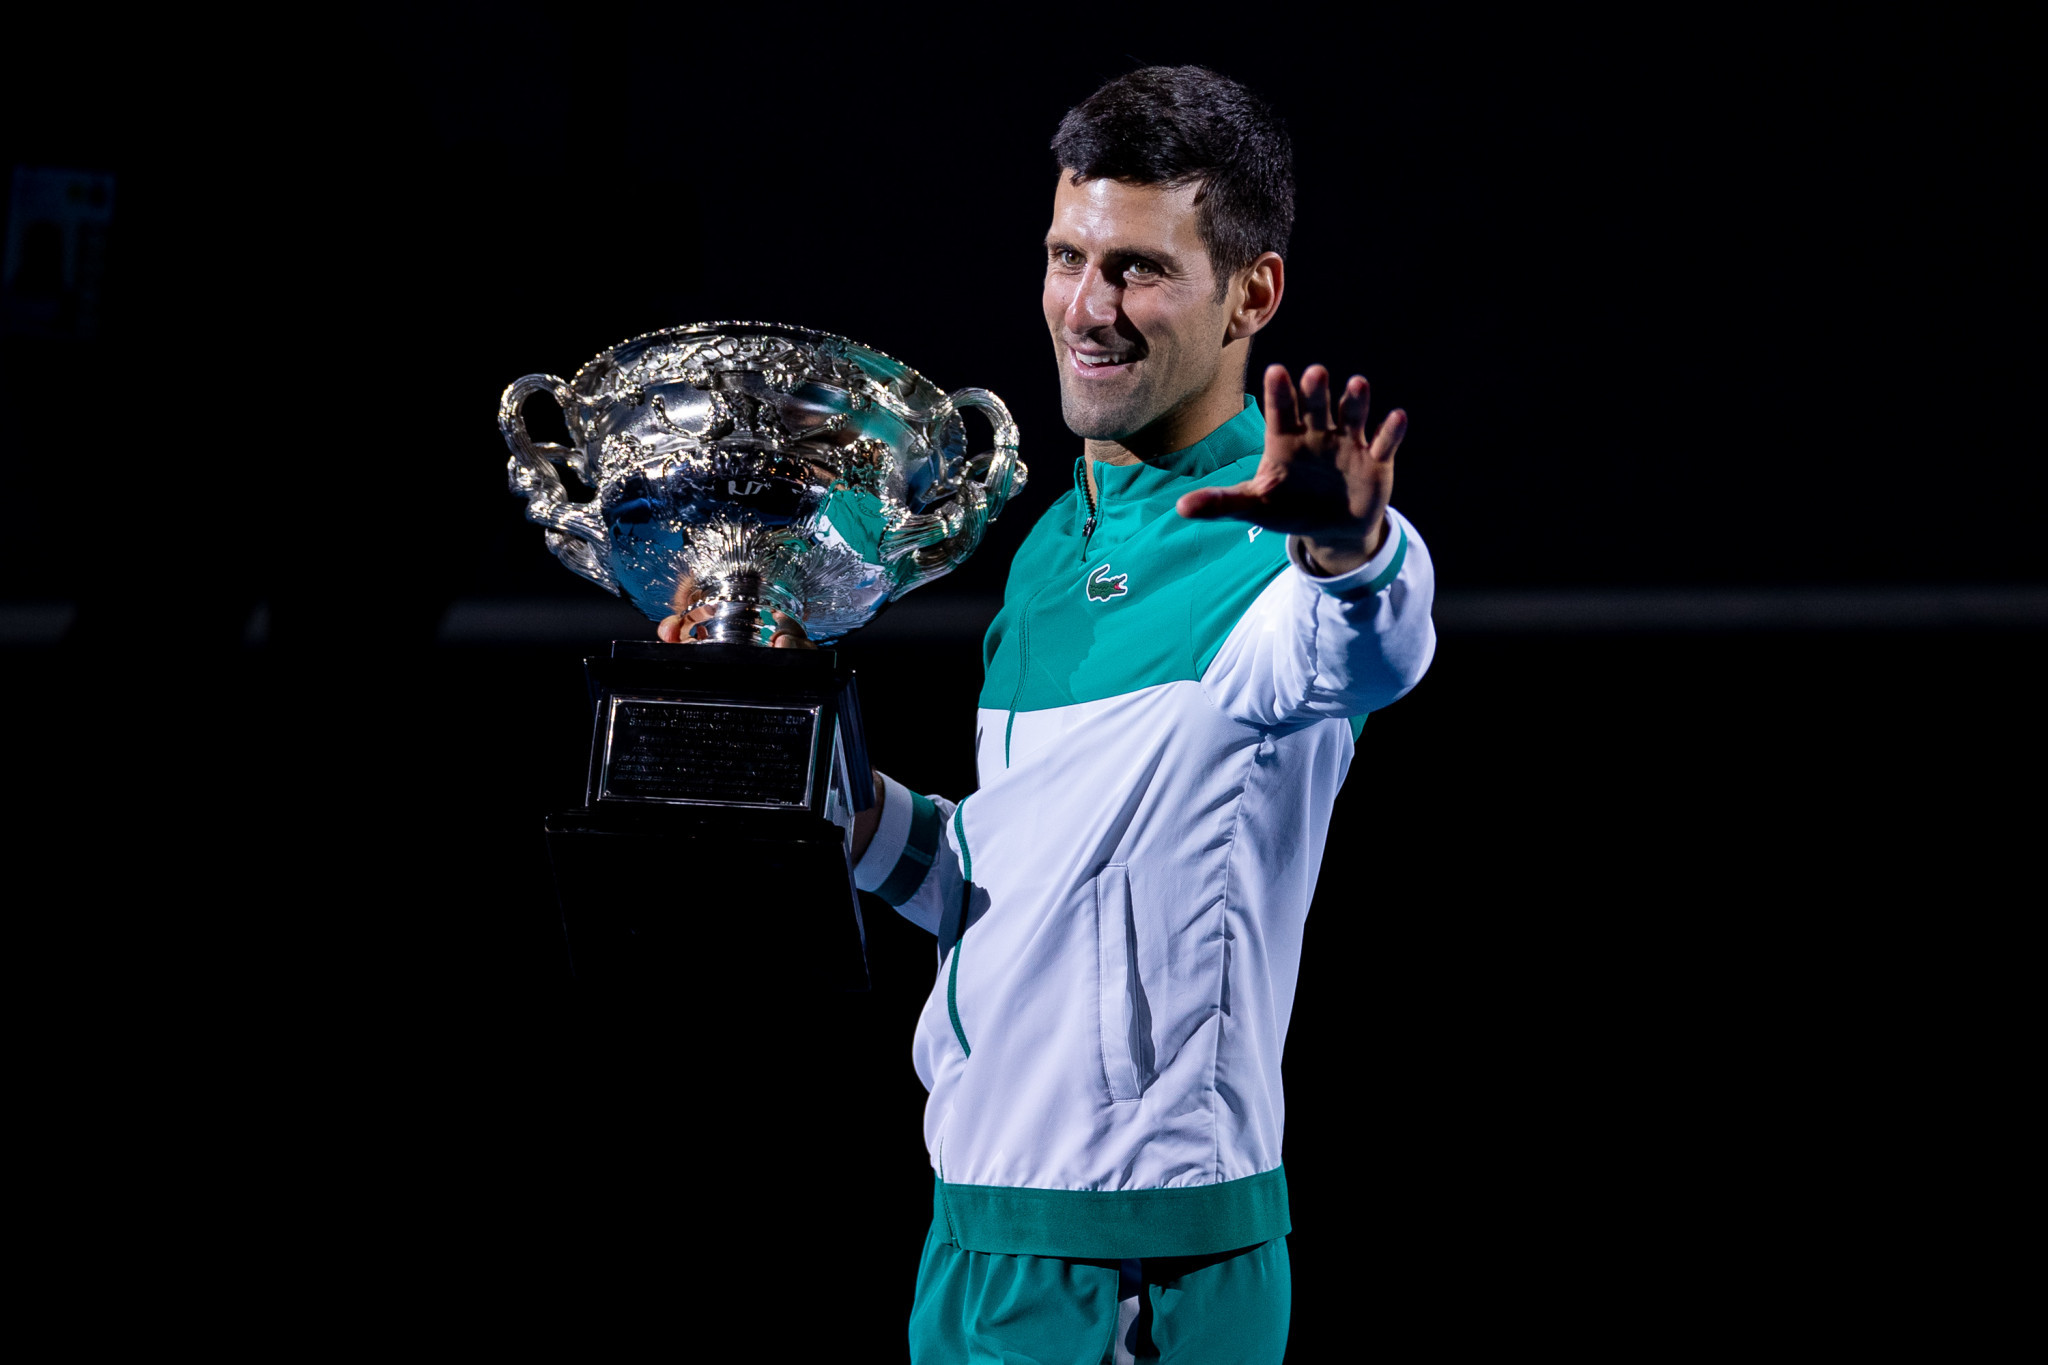 Compulsory vaccinations have proved a major talking point in the build-up to the Australian Open, with the participation of defending men's singles champion Novak Djokovic still unclear ©Getty Images